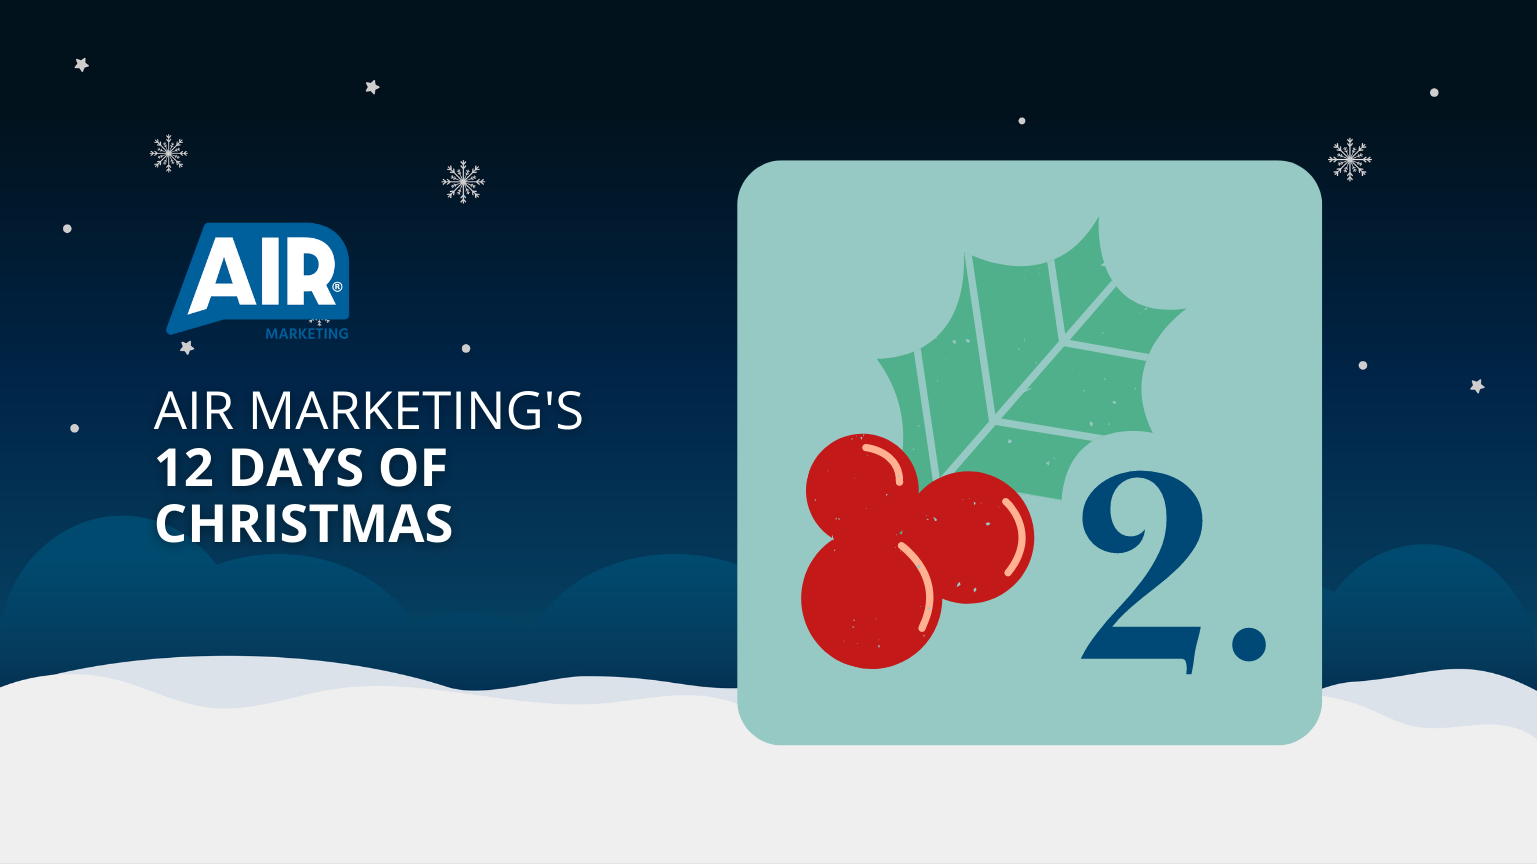 Day 2 of Air Marketing’s 12 Days of Christmas: Email Best Practices Guide